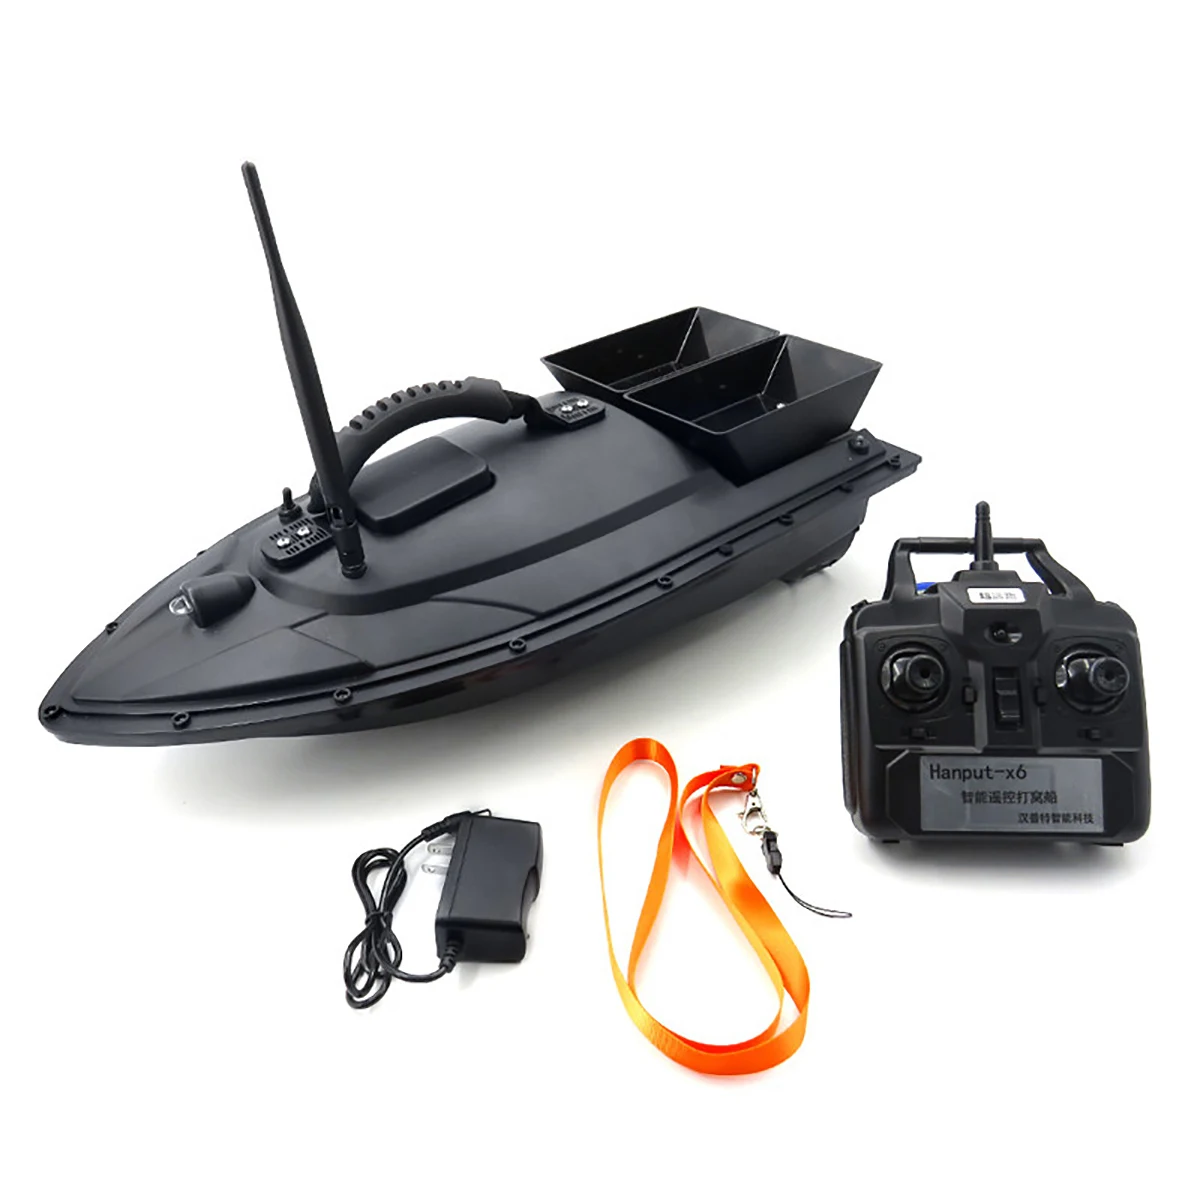 

Flytec 2011-5 Generation Fishing RC Bait Boat Toy Dual Motor Fish Finder Remote Control Fishing Boat Speed RTR Kit Christmas